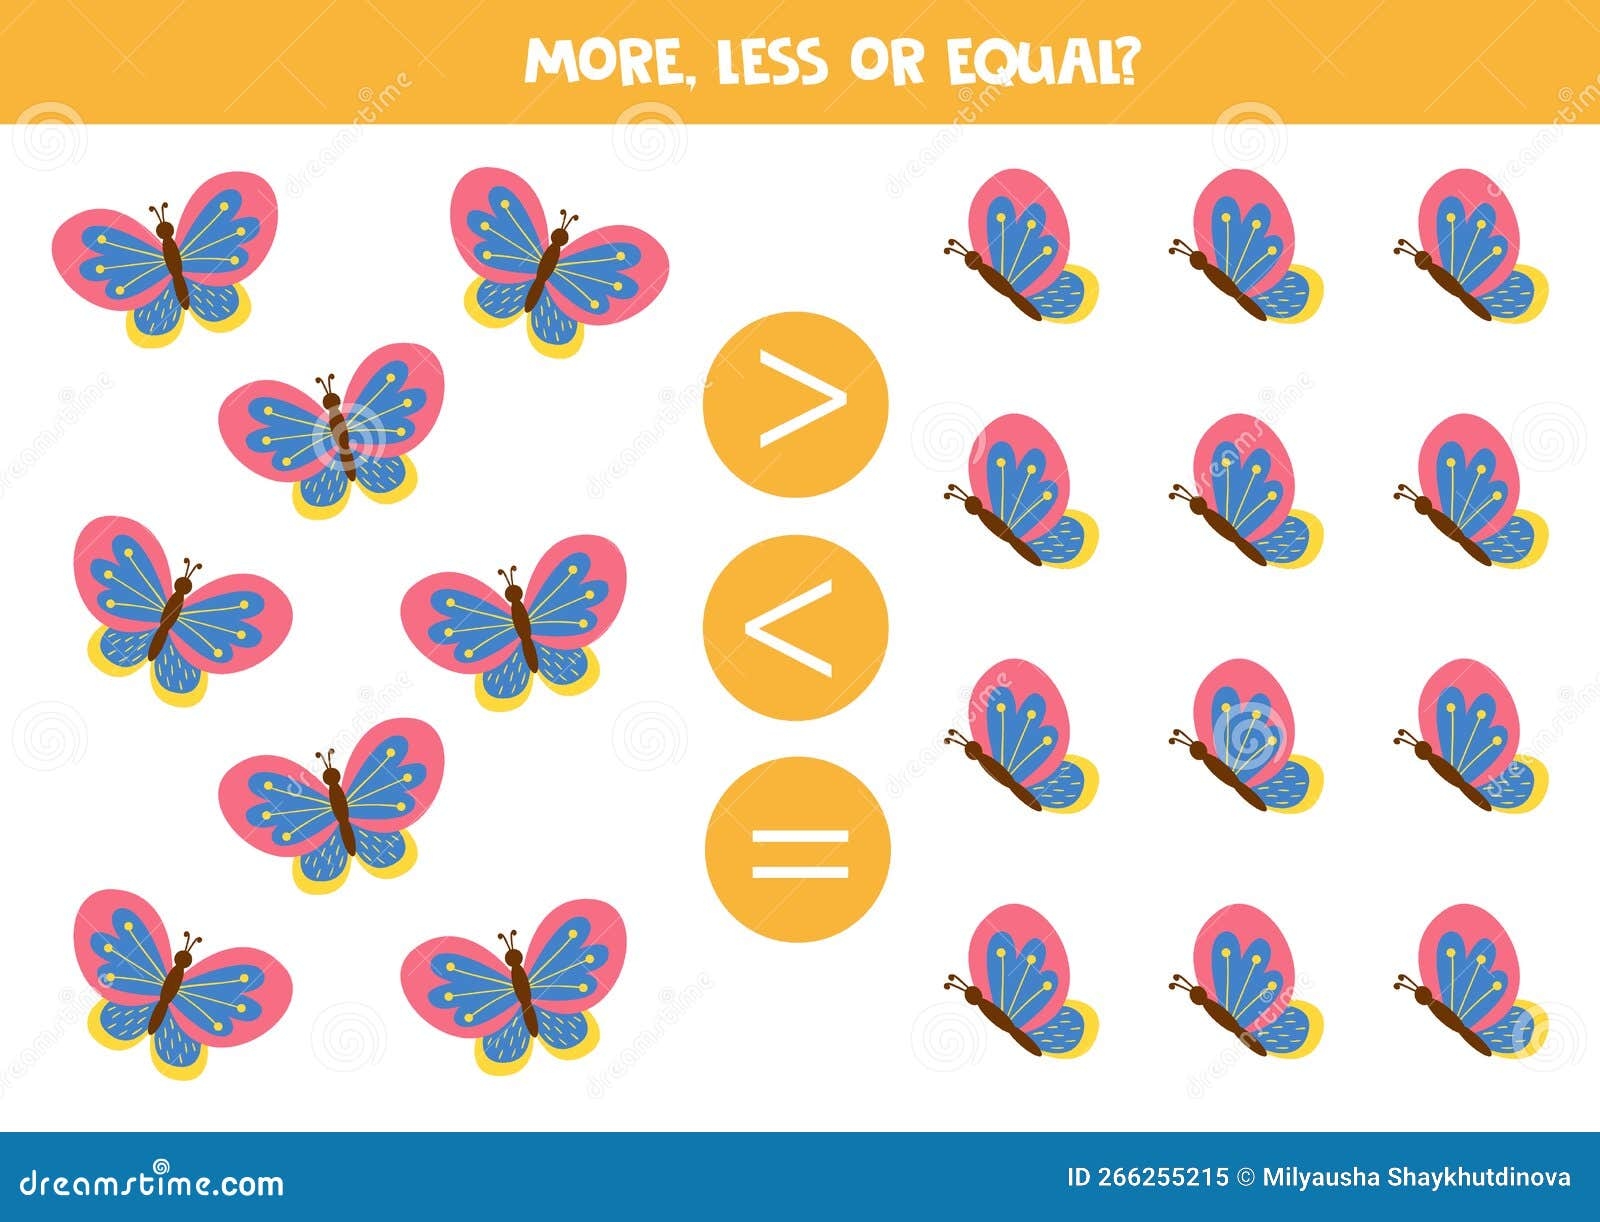 More Less Equal With Cute Cartoon Butterflies Math Game For Kids Stock Illustration Illustration Of Beauty Learning 266255215